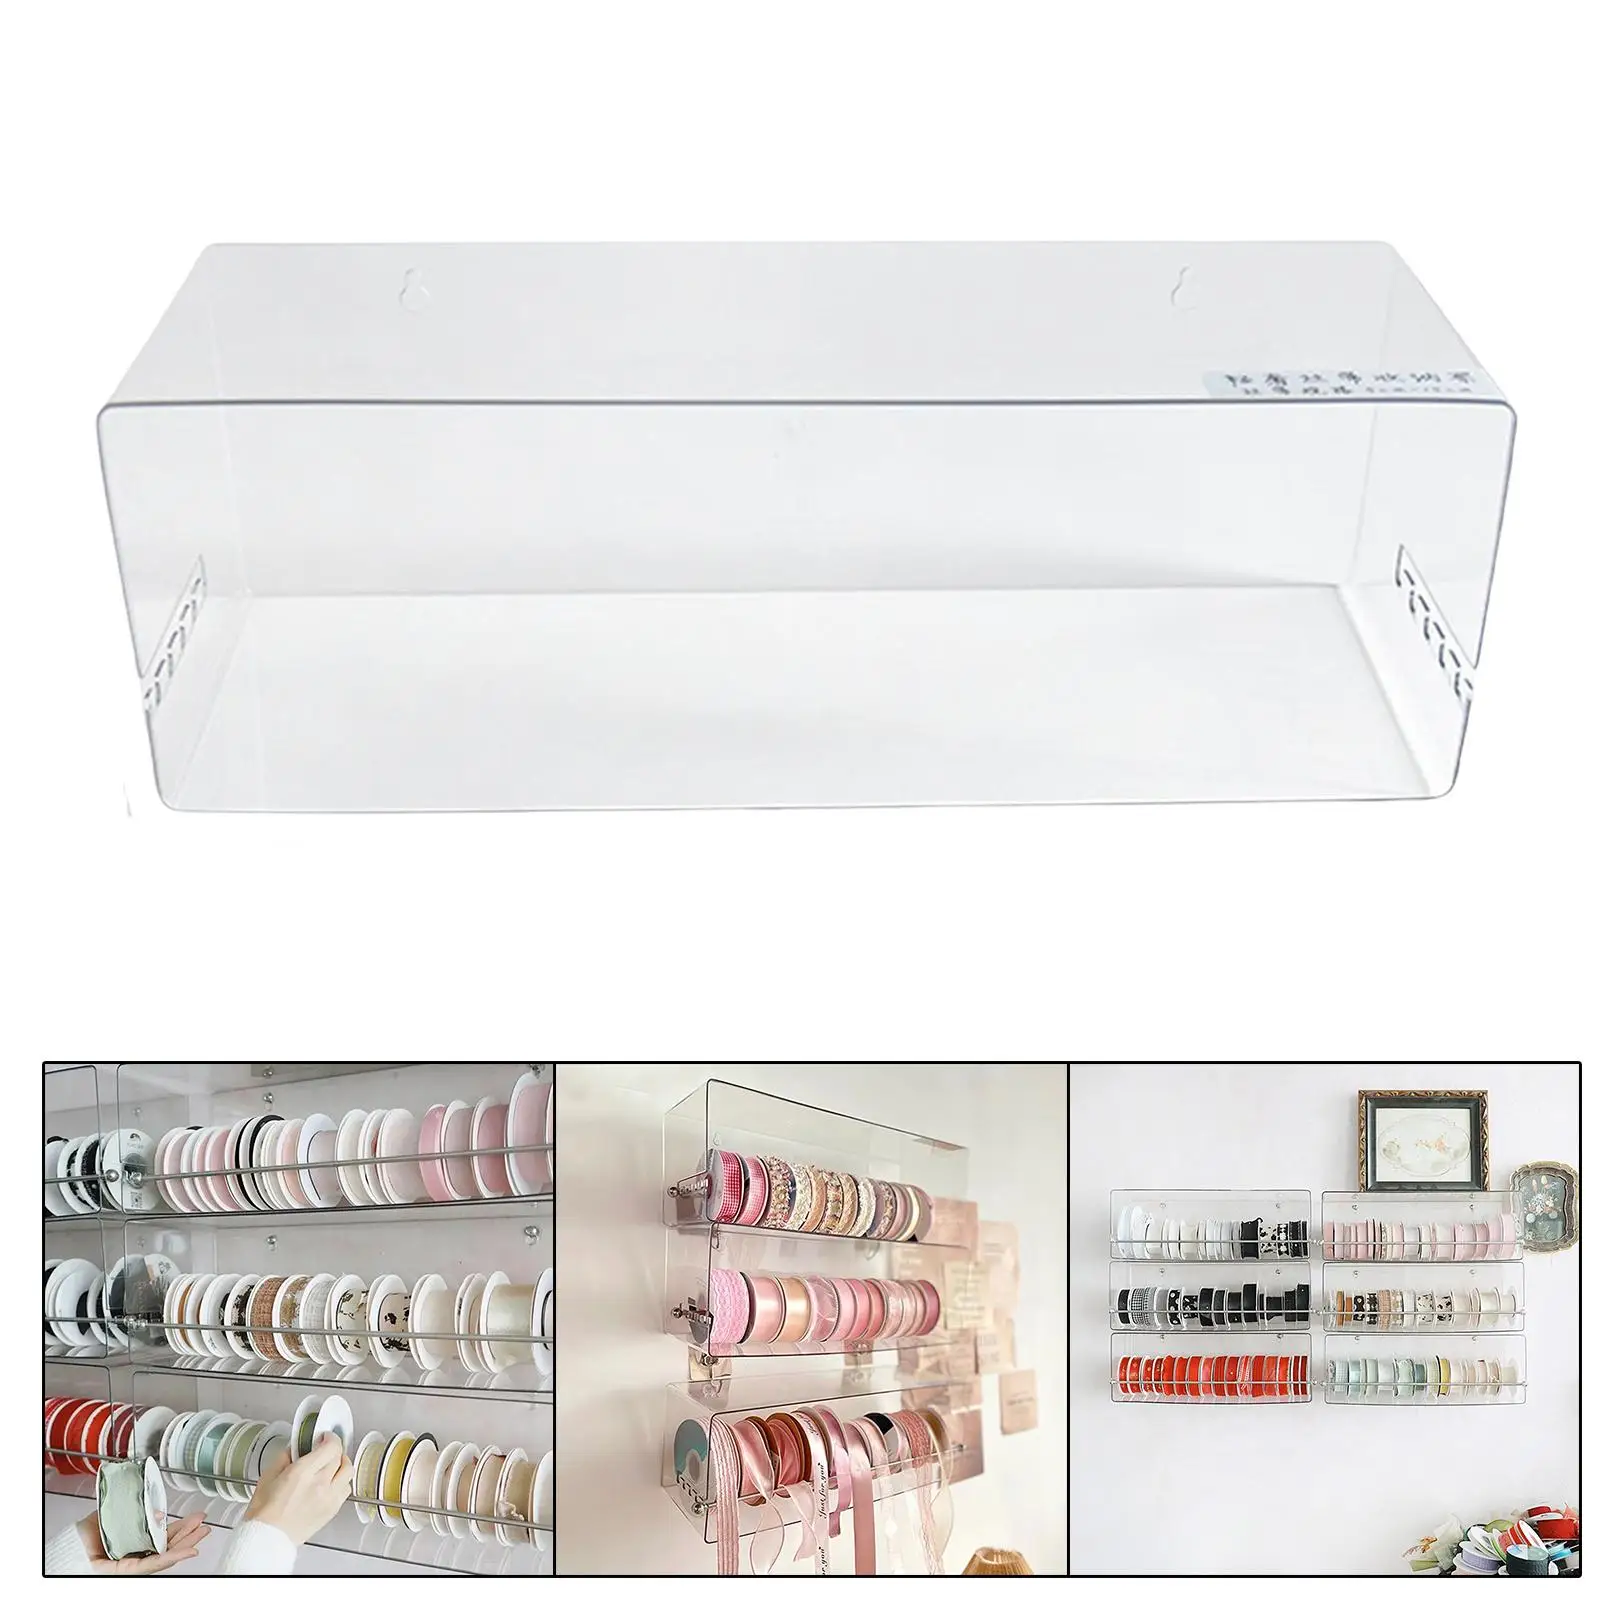 Washi Tape Organizer Sewing Thread Spool Rack Transparent for Home Sundries